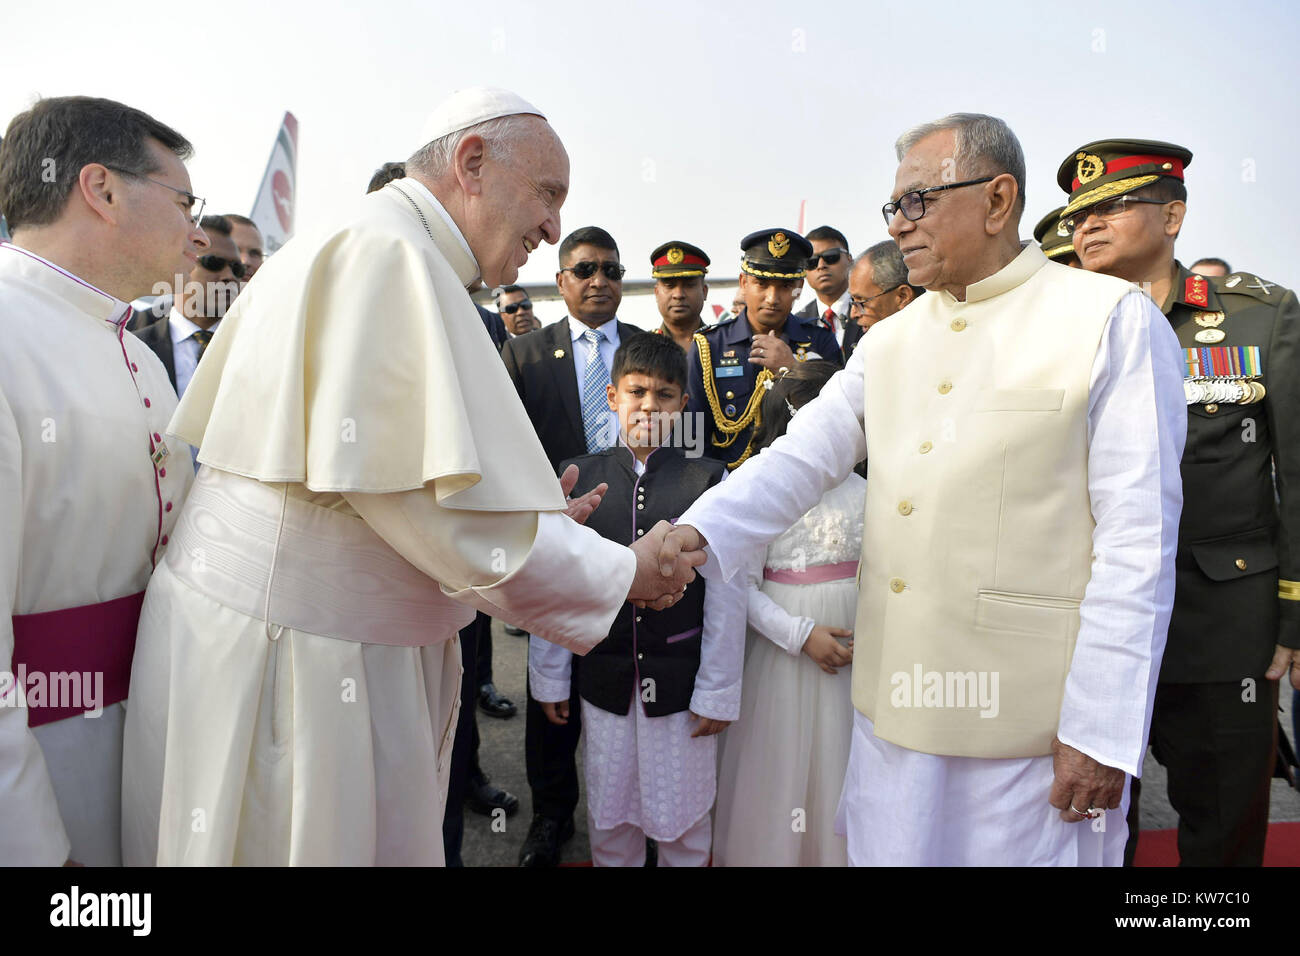 Pope Francis is welcomed by Bangladesh President Abdul Hamid, right, upon his arrival at the international airport, in Dhaka, Bangladesh.  Featuring: Pope Francis, Abdul Hamid Where: Dhaka, Bangladesh When: 30 Nov 2017 Credit: IPA/WENN.com  **Only available for publication in UK, USA, Germany, Austria, Switzerland** Stock Photo